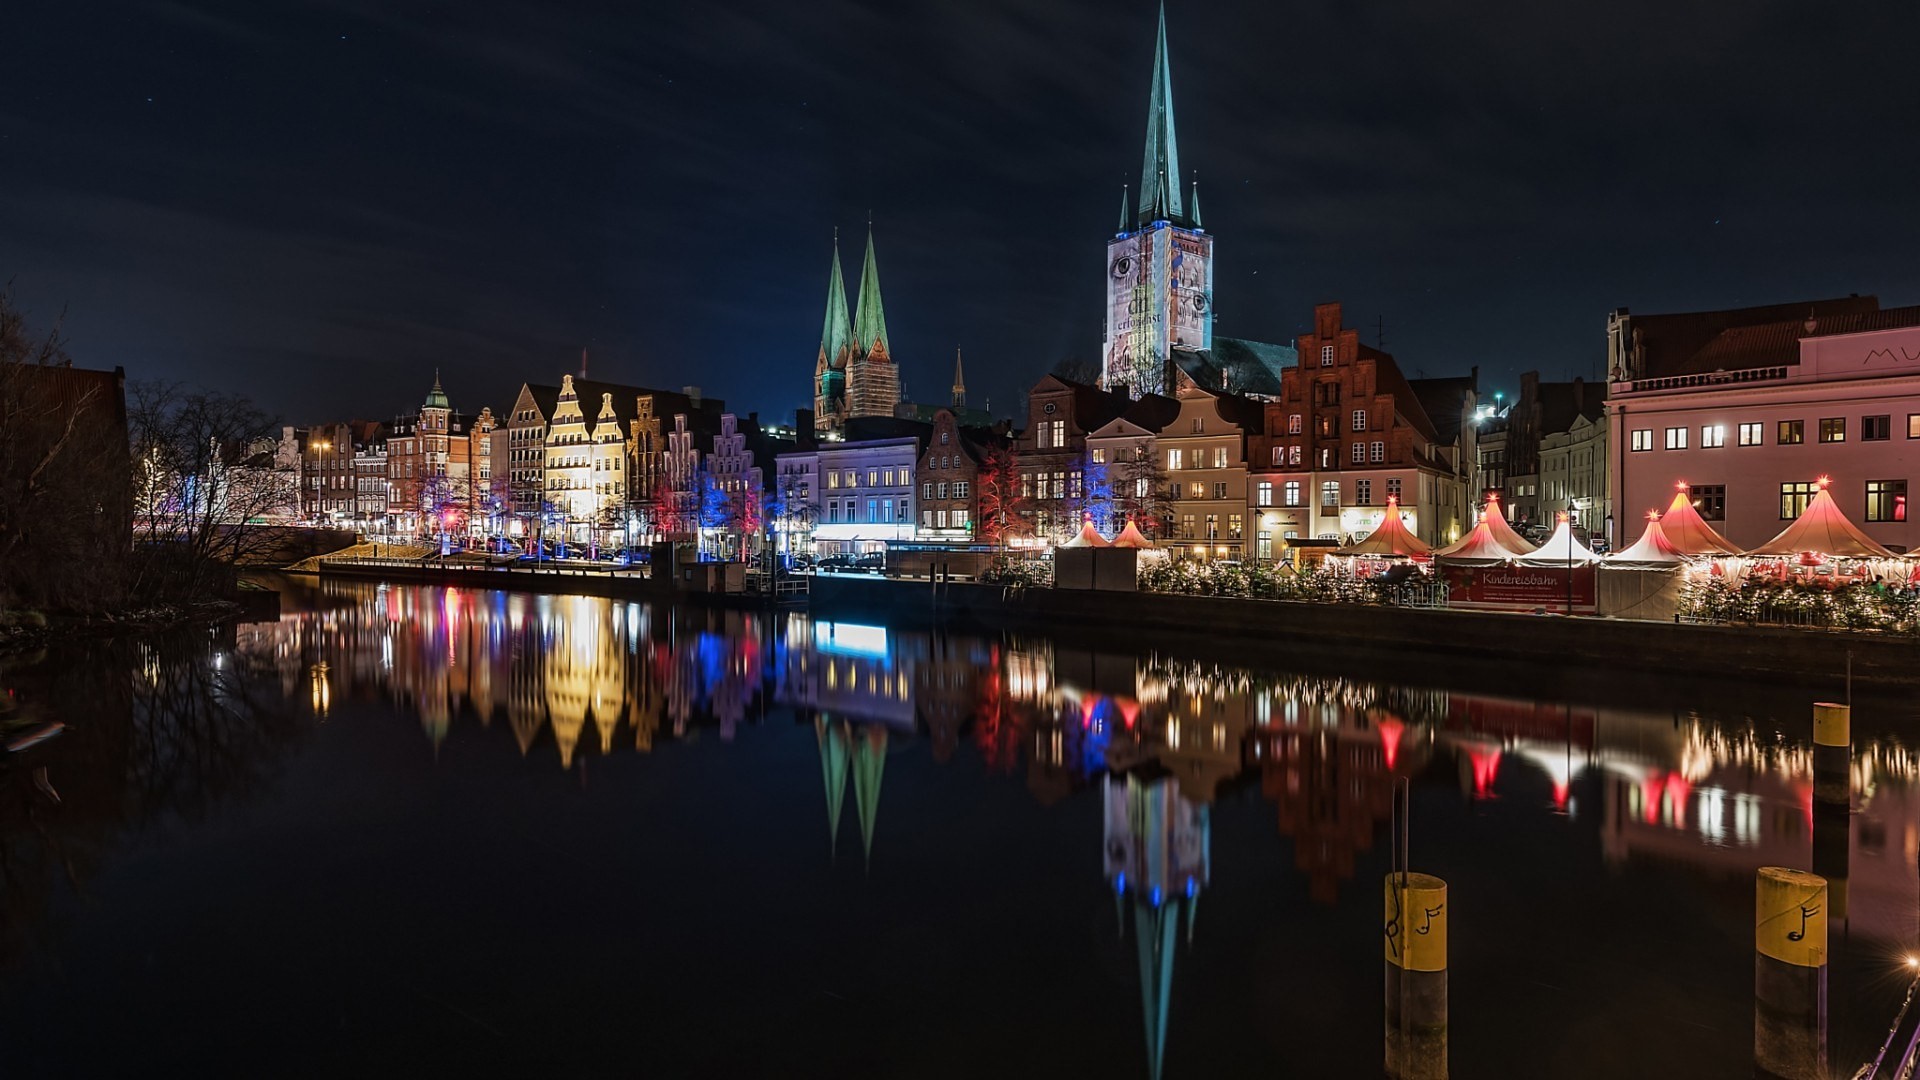 General 1920x1080 architecture city cityscape building Germany river night clouds church house lights markets trees tower long exposure winter reflection street